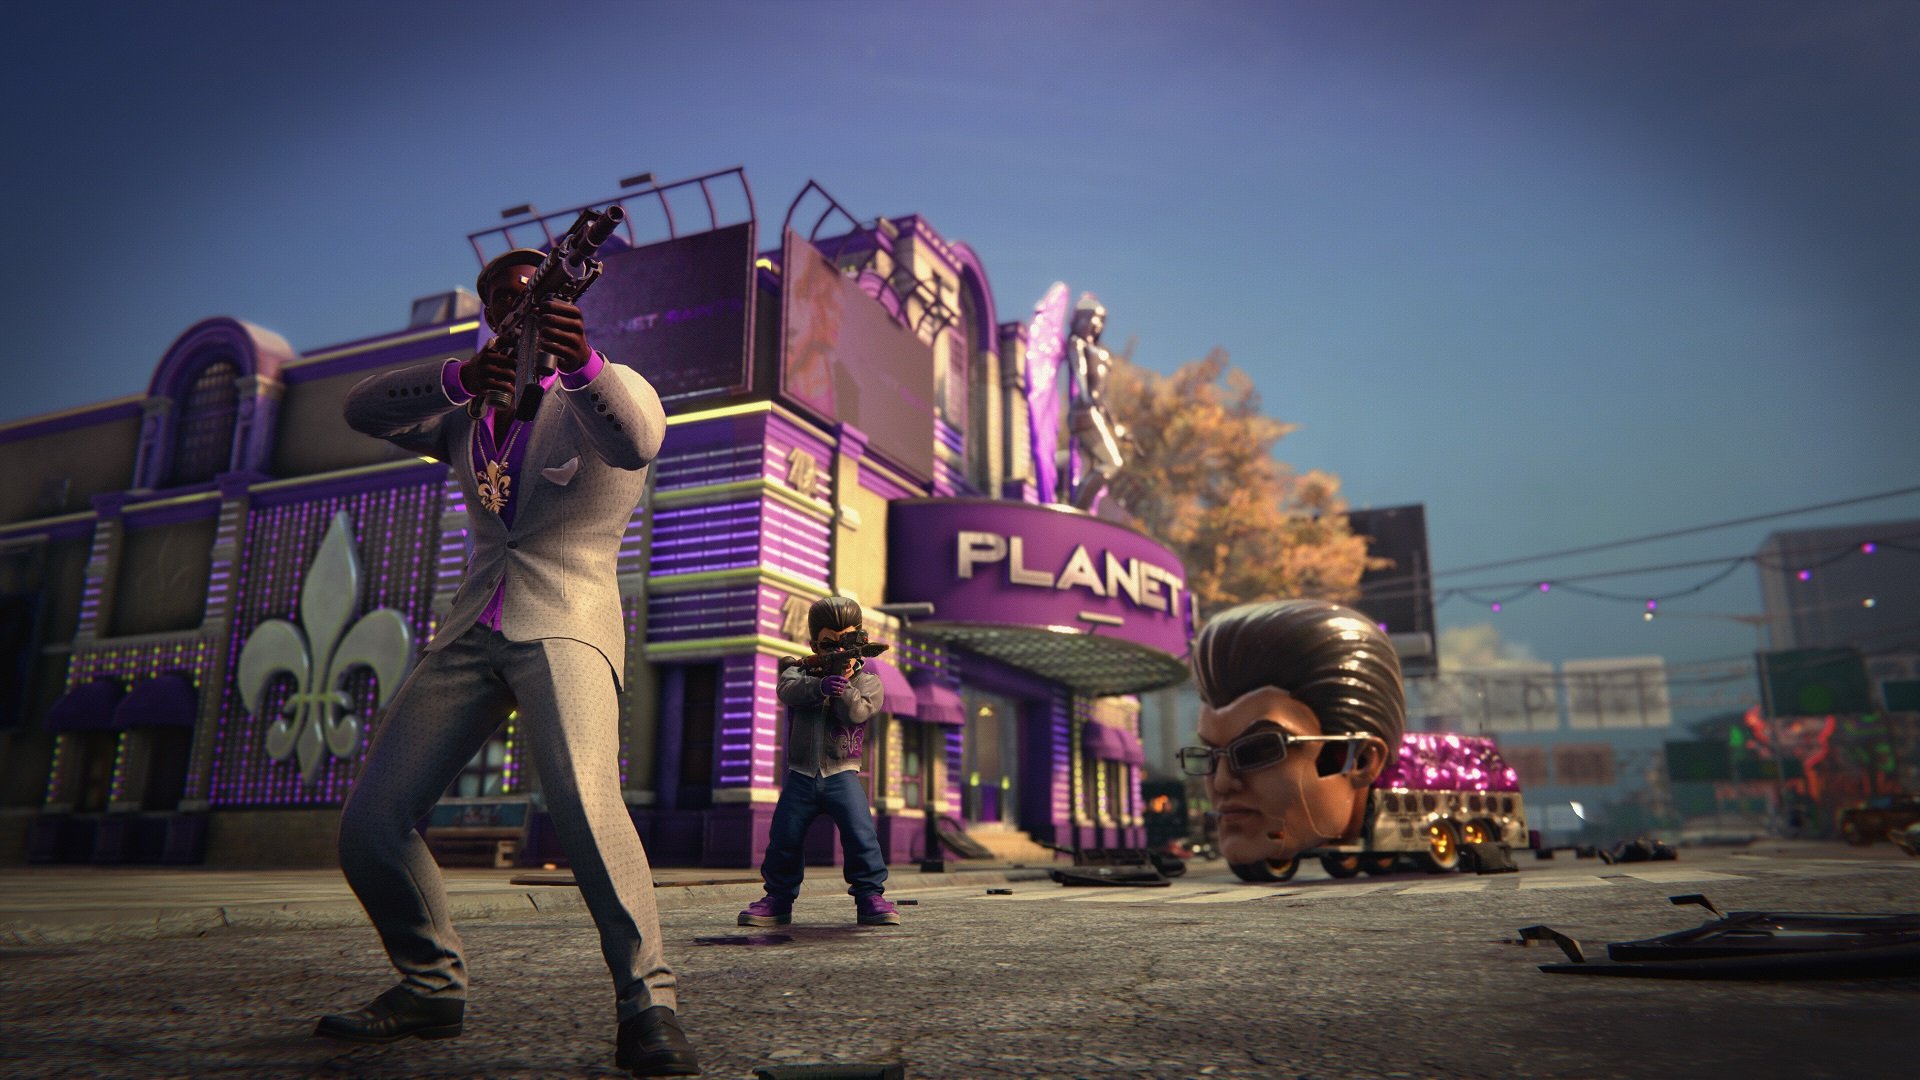 Saints Row: The Third Remastered Comes to Steam on May 22 